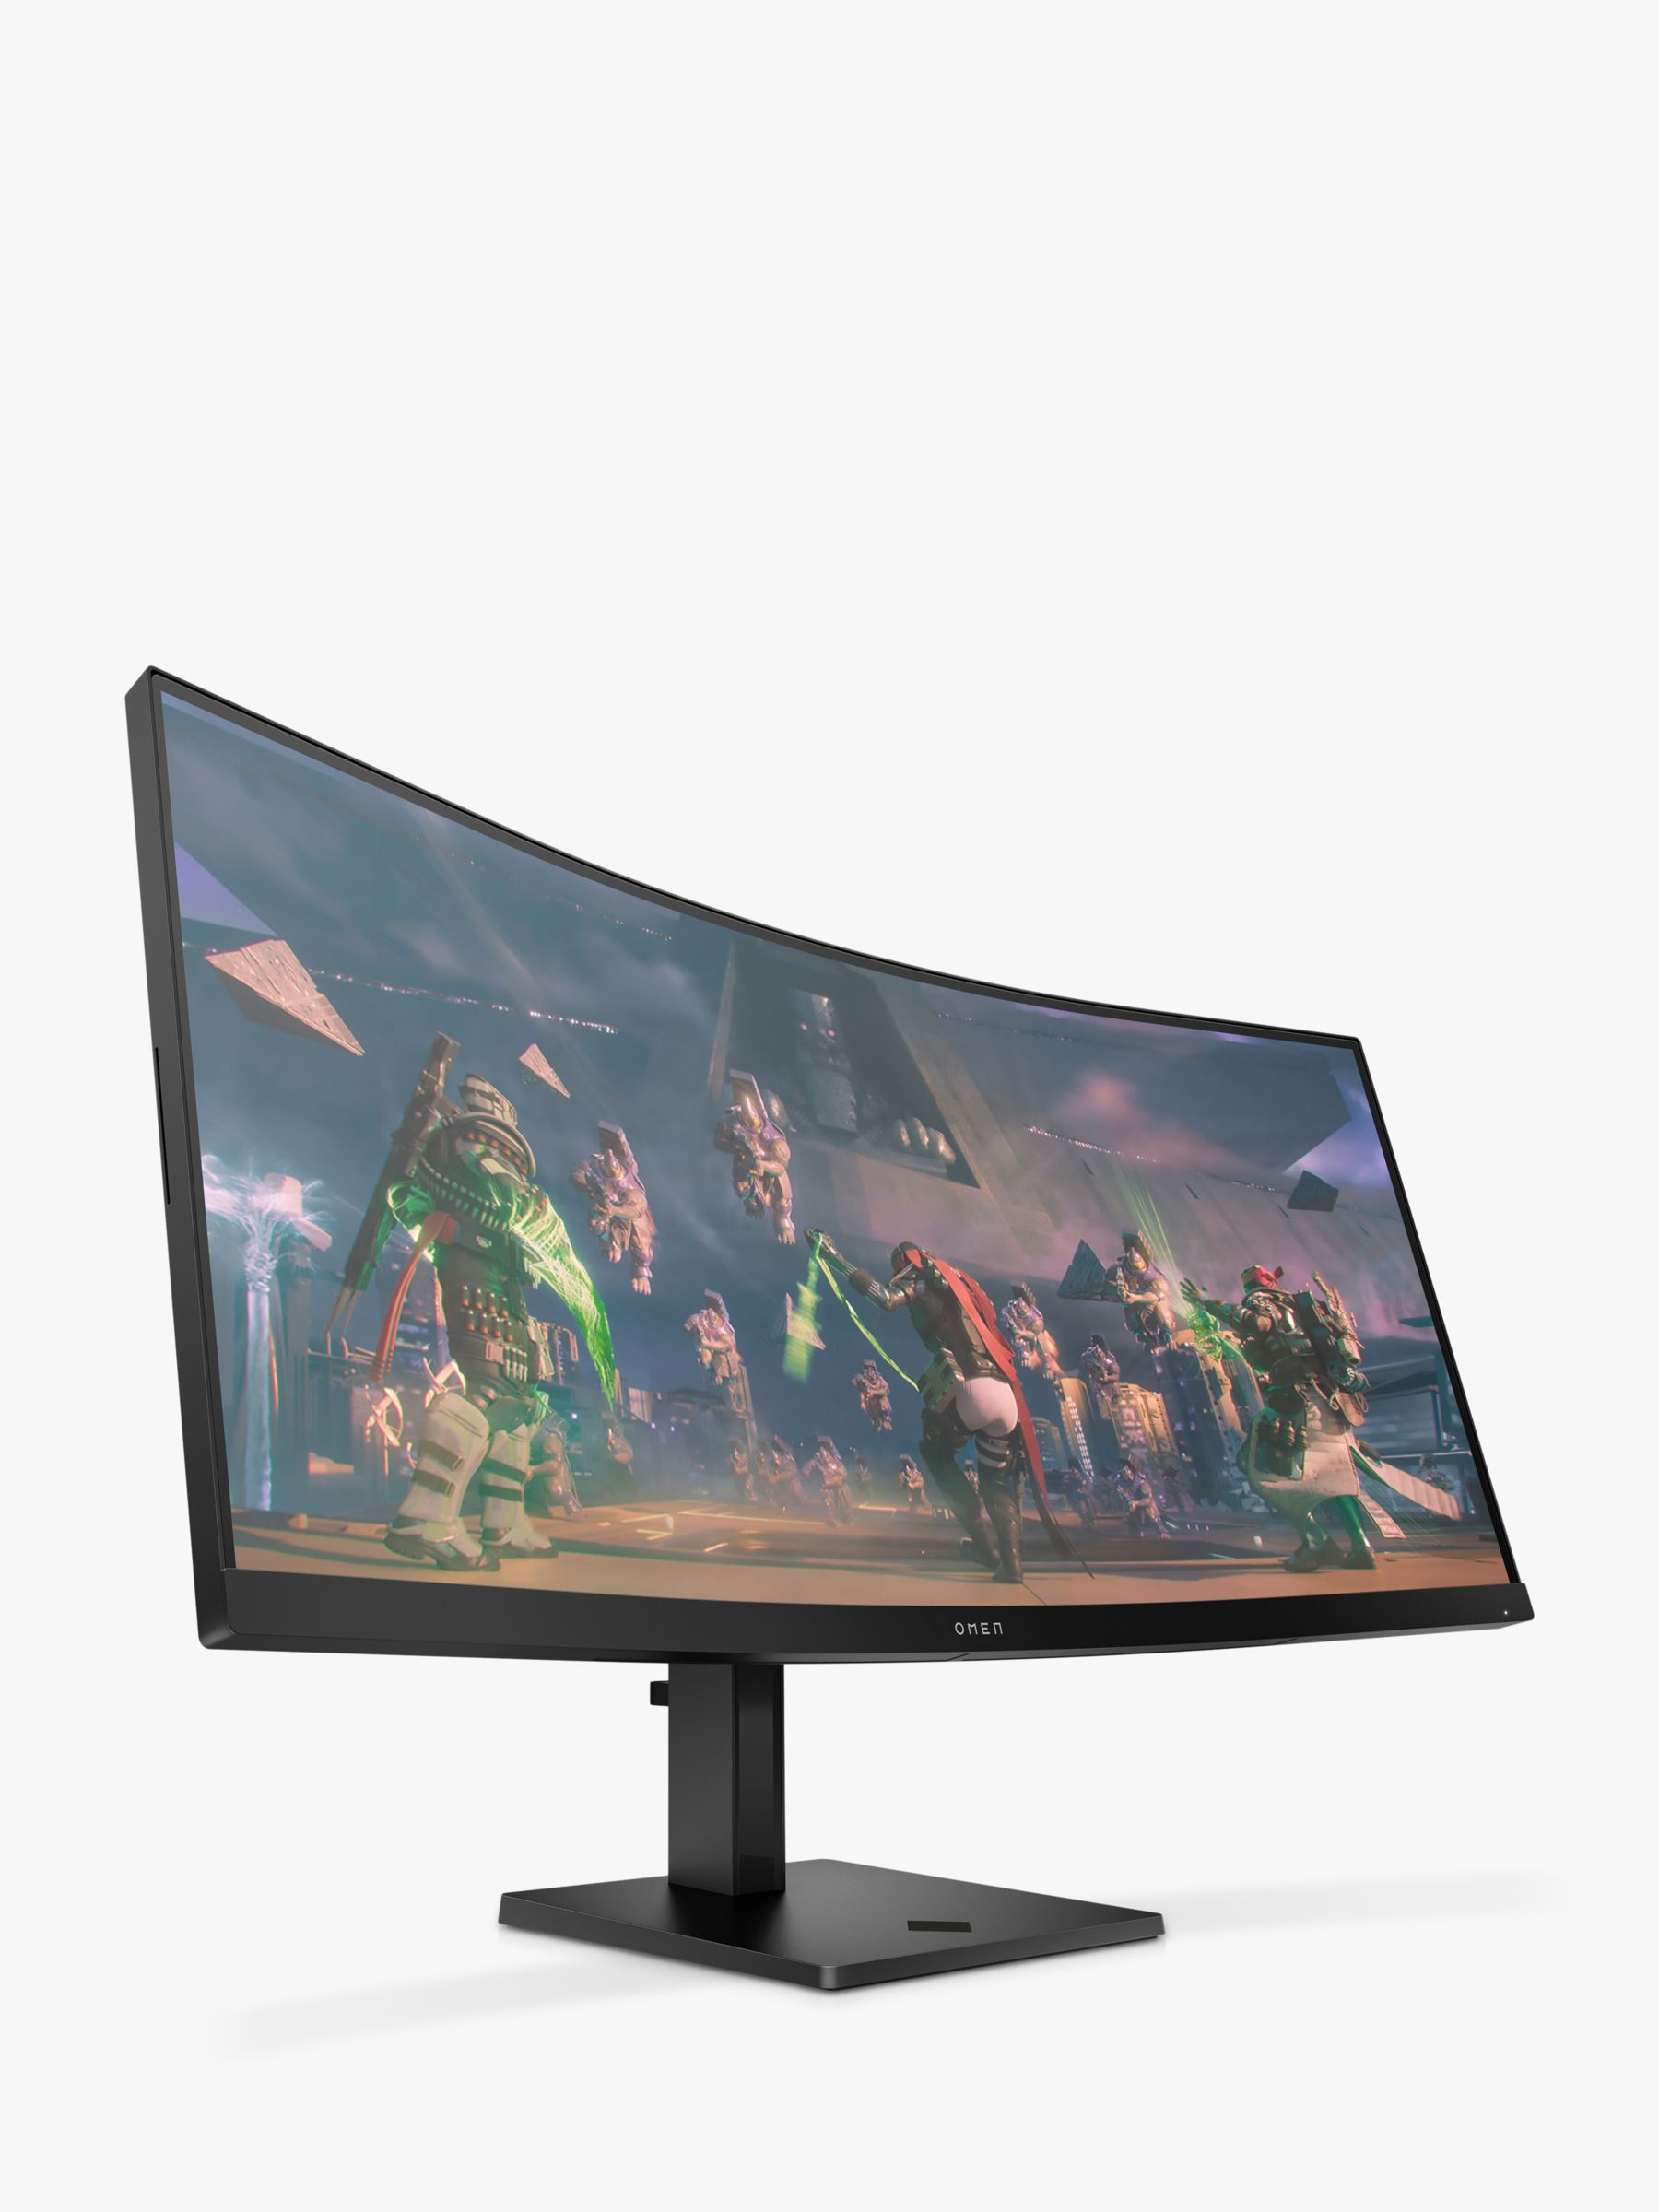 HP OMEN 34c Quad HD Curved HDR Ultrawide Gaming Monitor